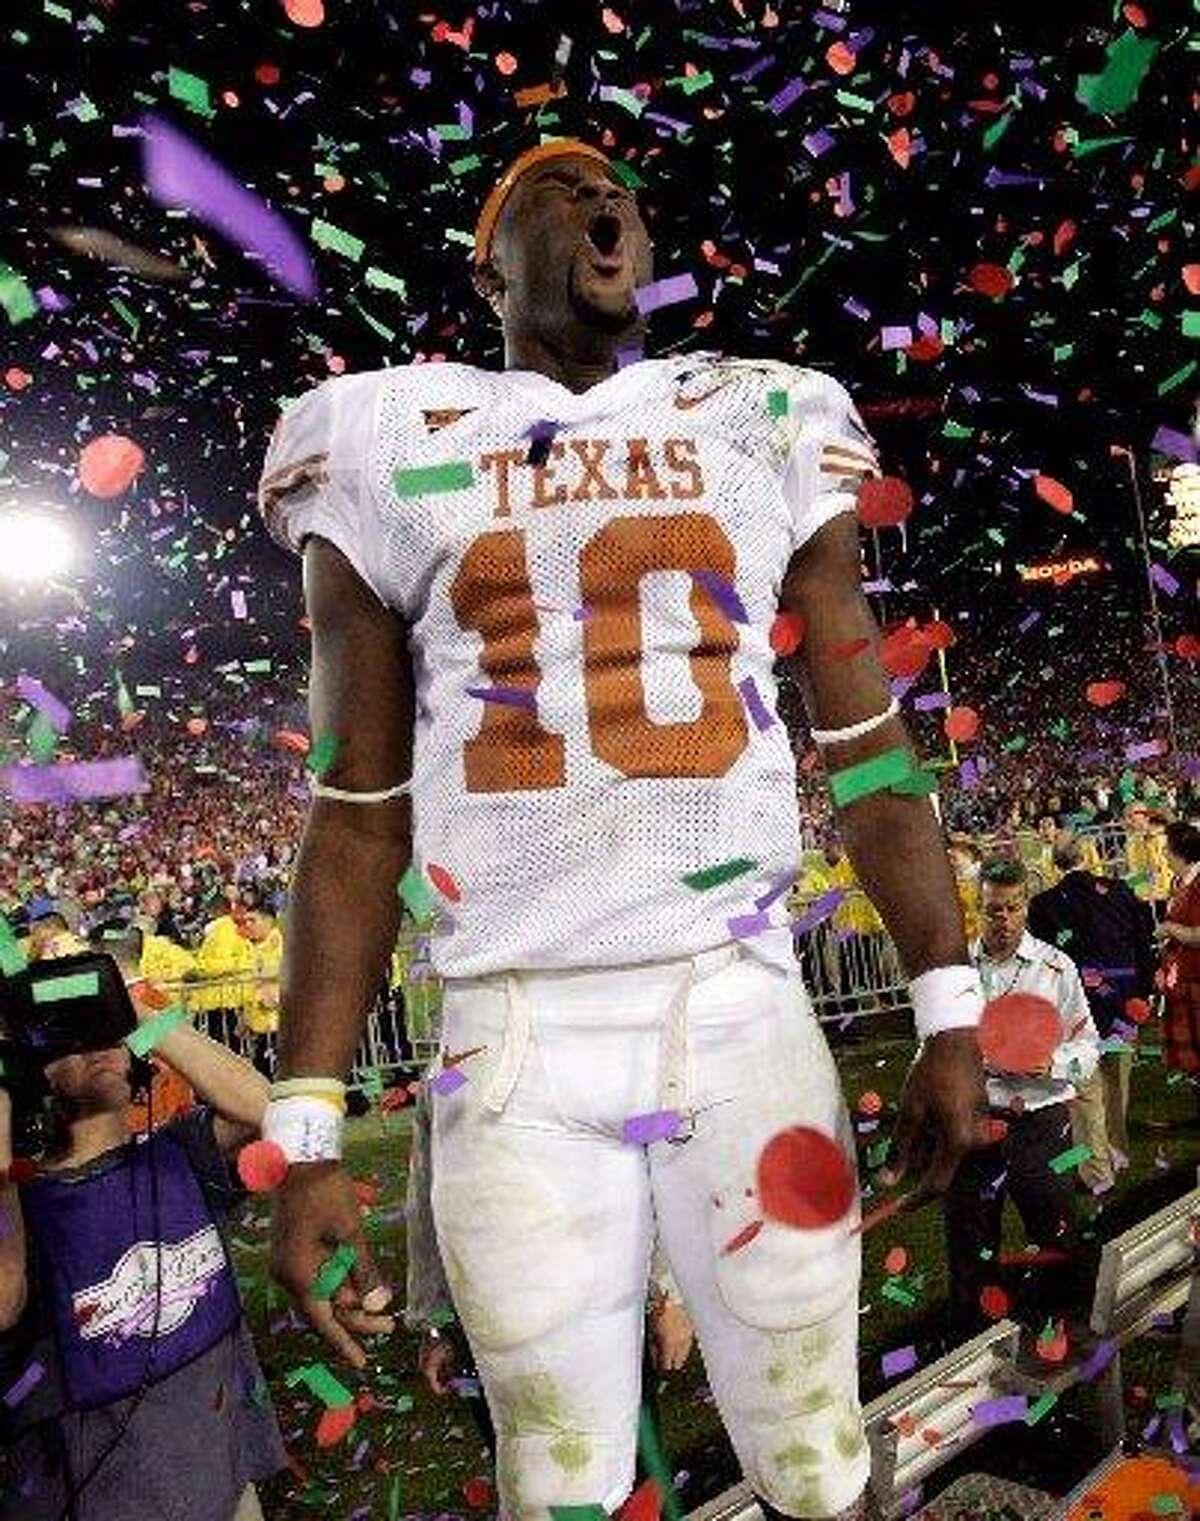 Texas Longhorns quarterback Vince Young celebrates his team’s 41-38 victory over the USC Trojans for the national championship at the 92nd Rose Bowl game in Pasadena, California January 4, 2006.